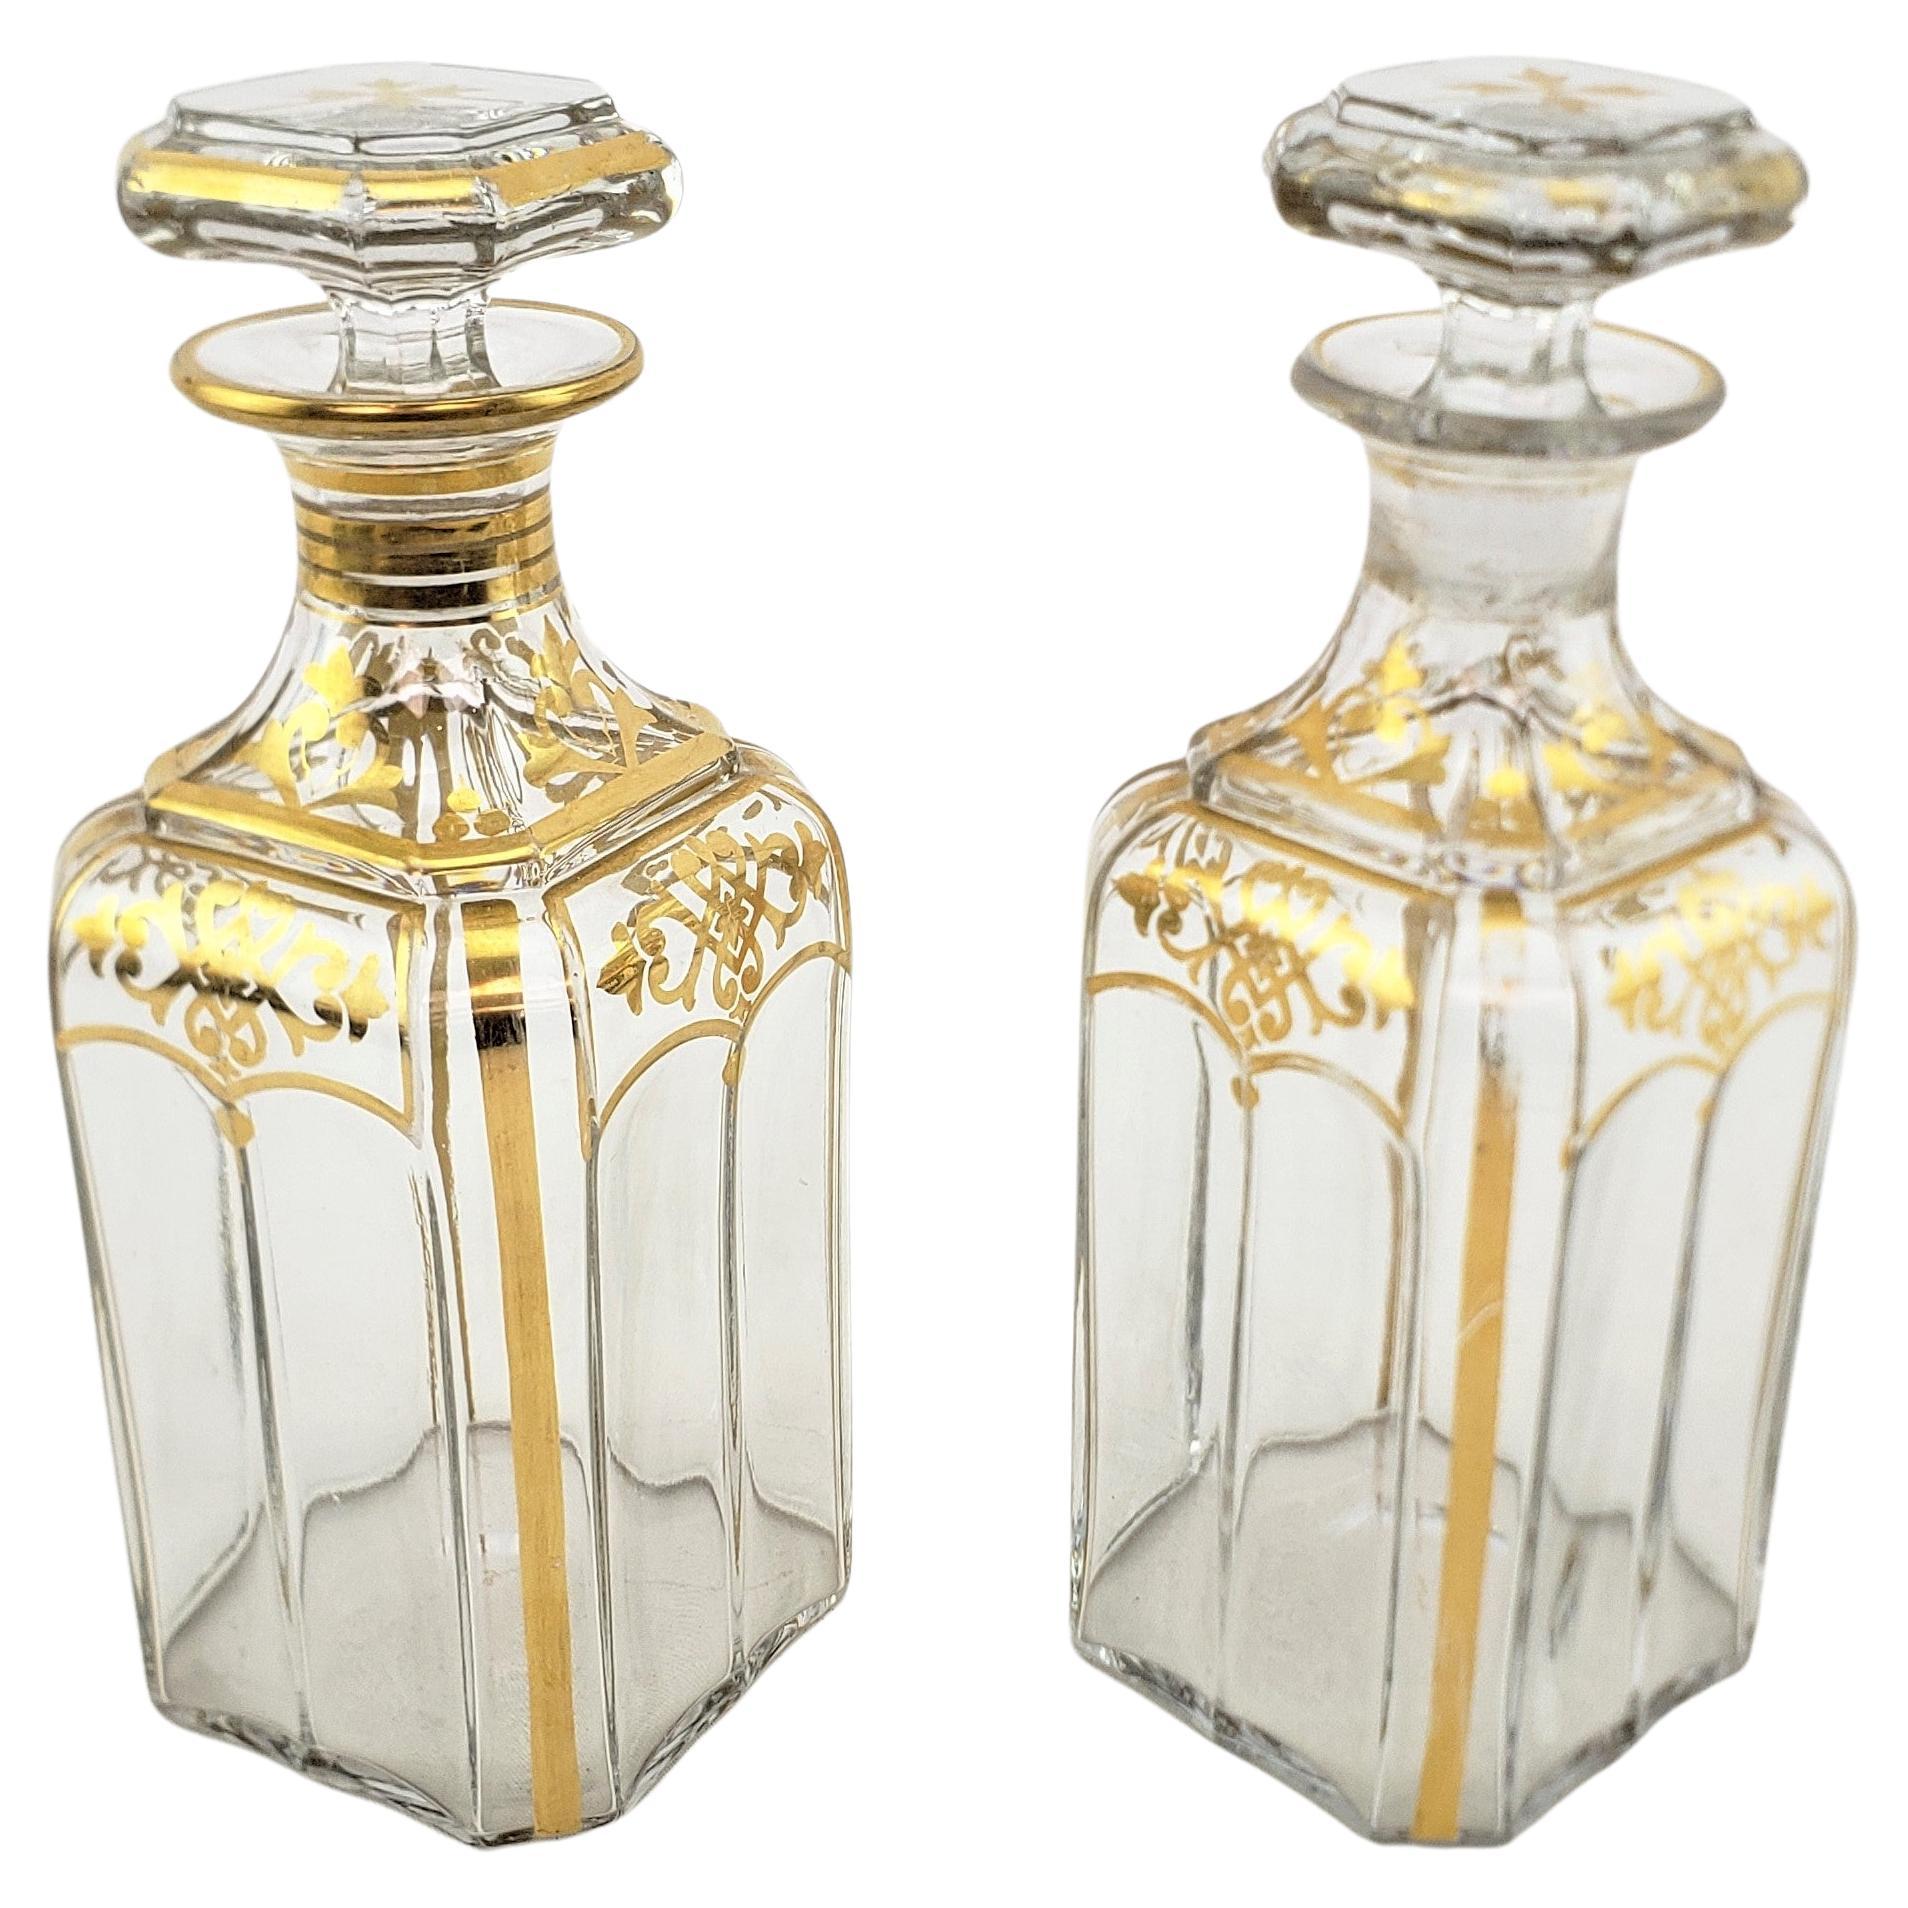 Pair of Antique French Clear Crystal Bottle Decanters with Gilt Decoration